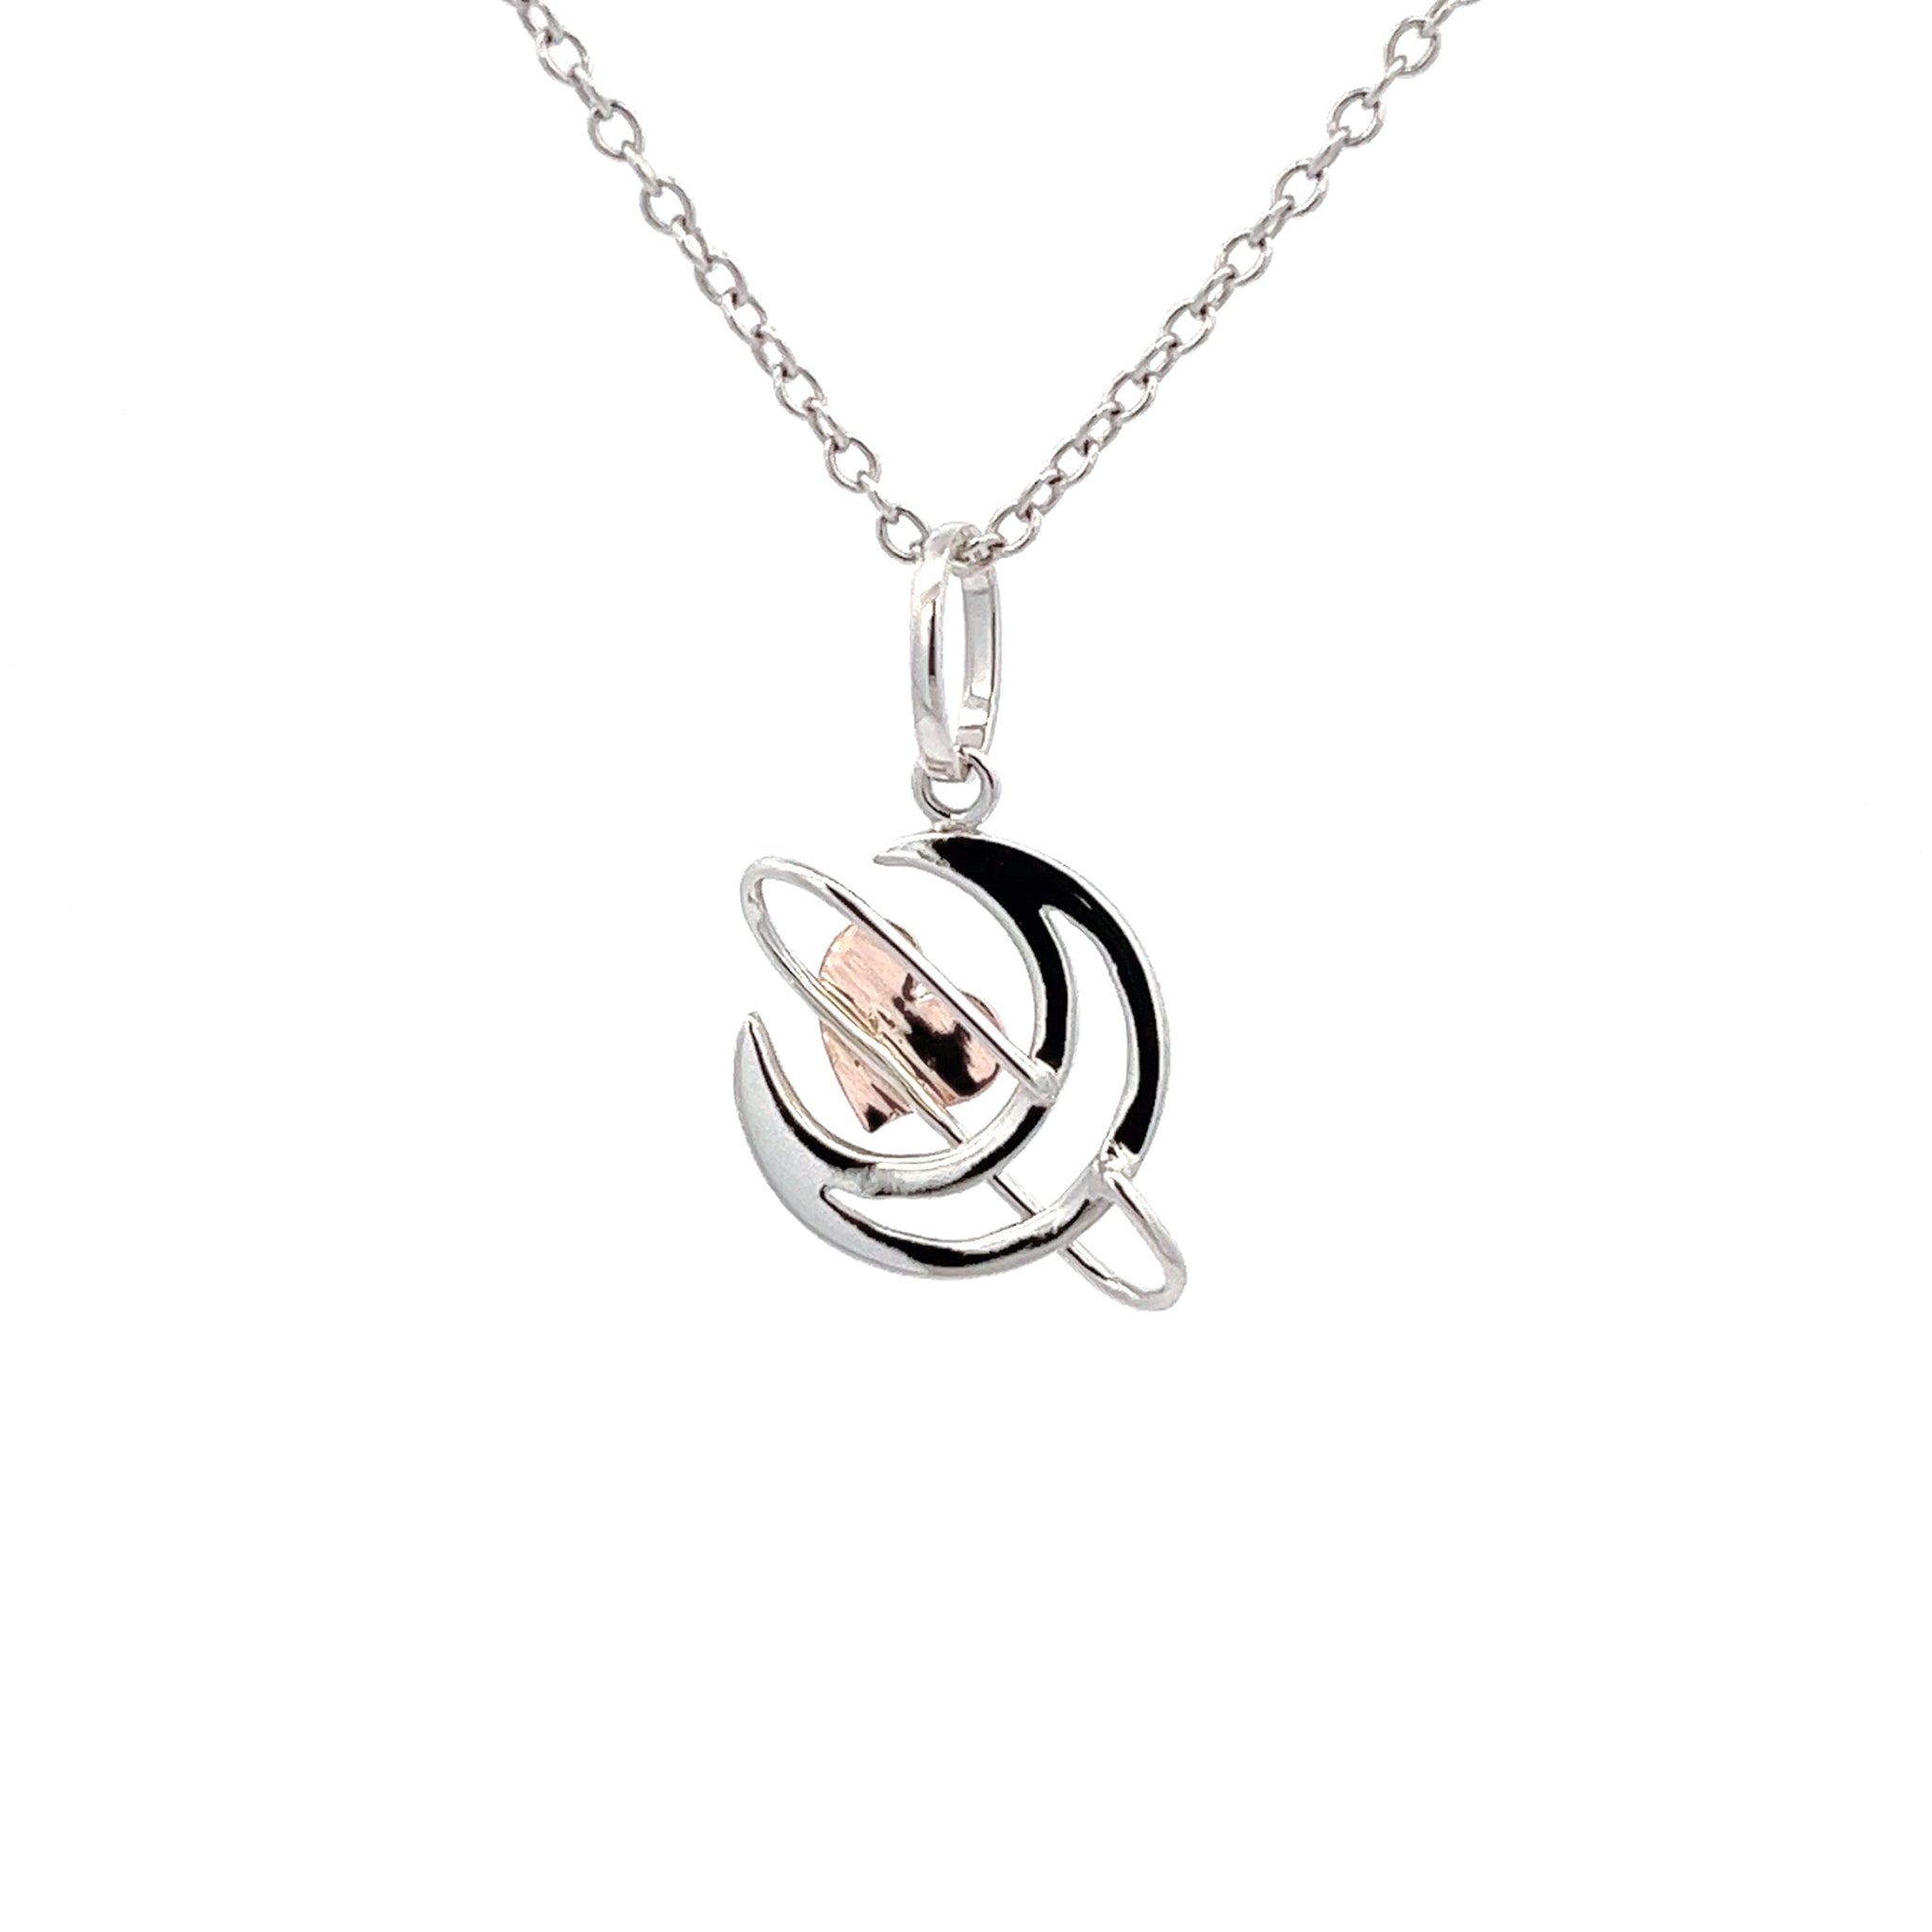 To The Moon and Back Pendant 4843